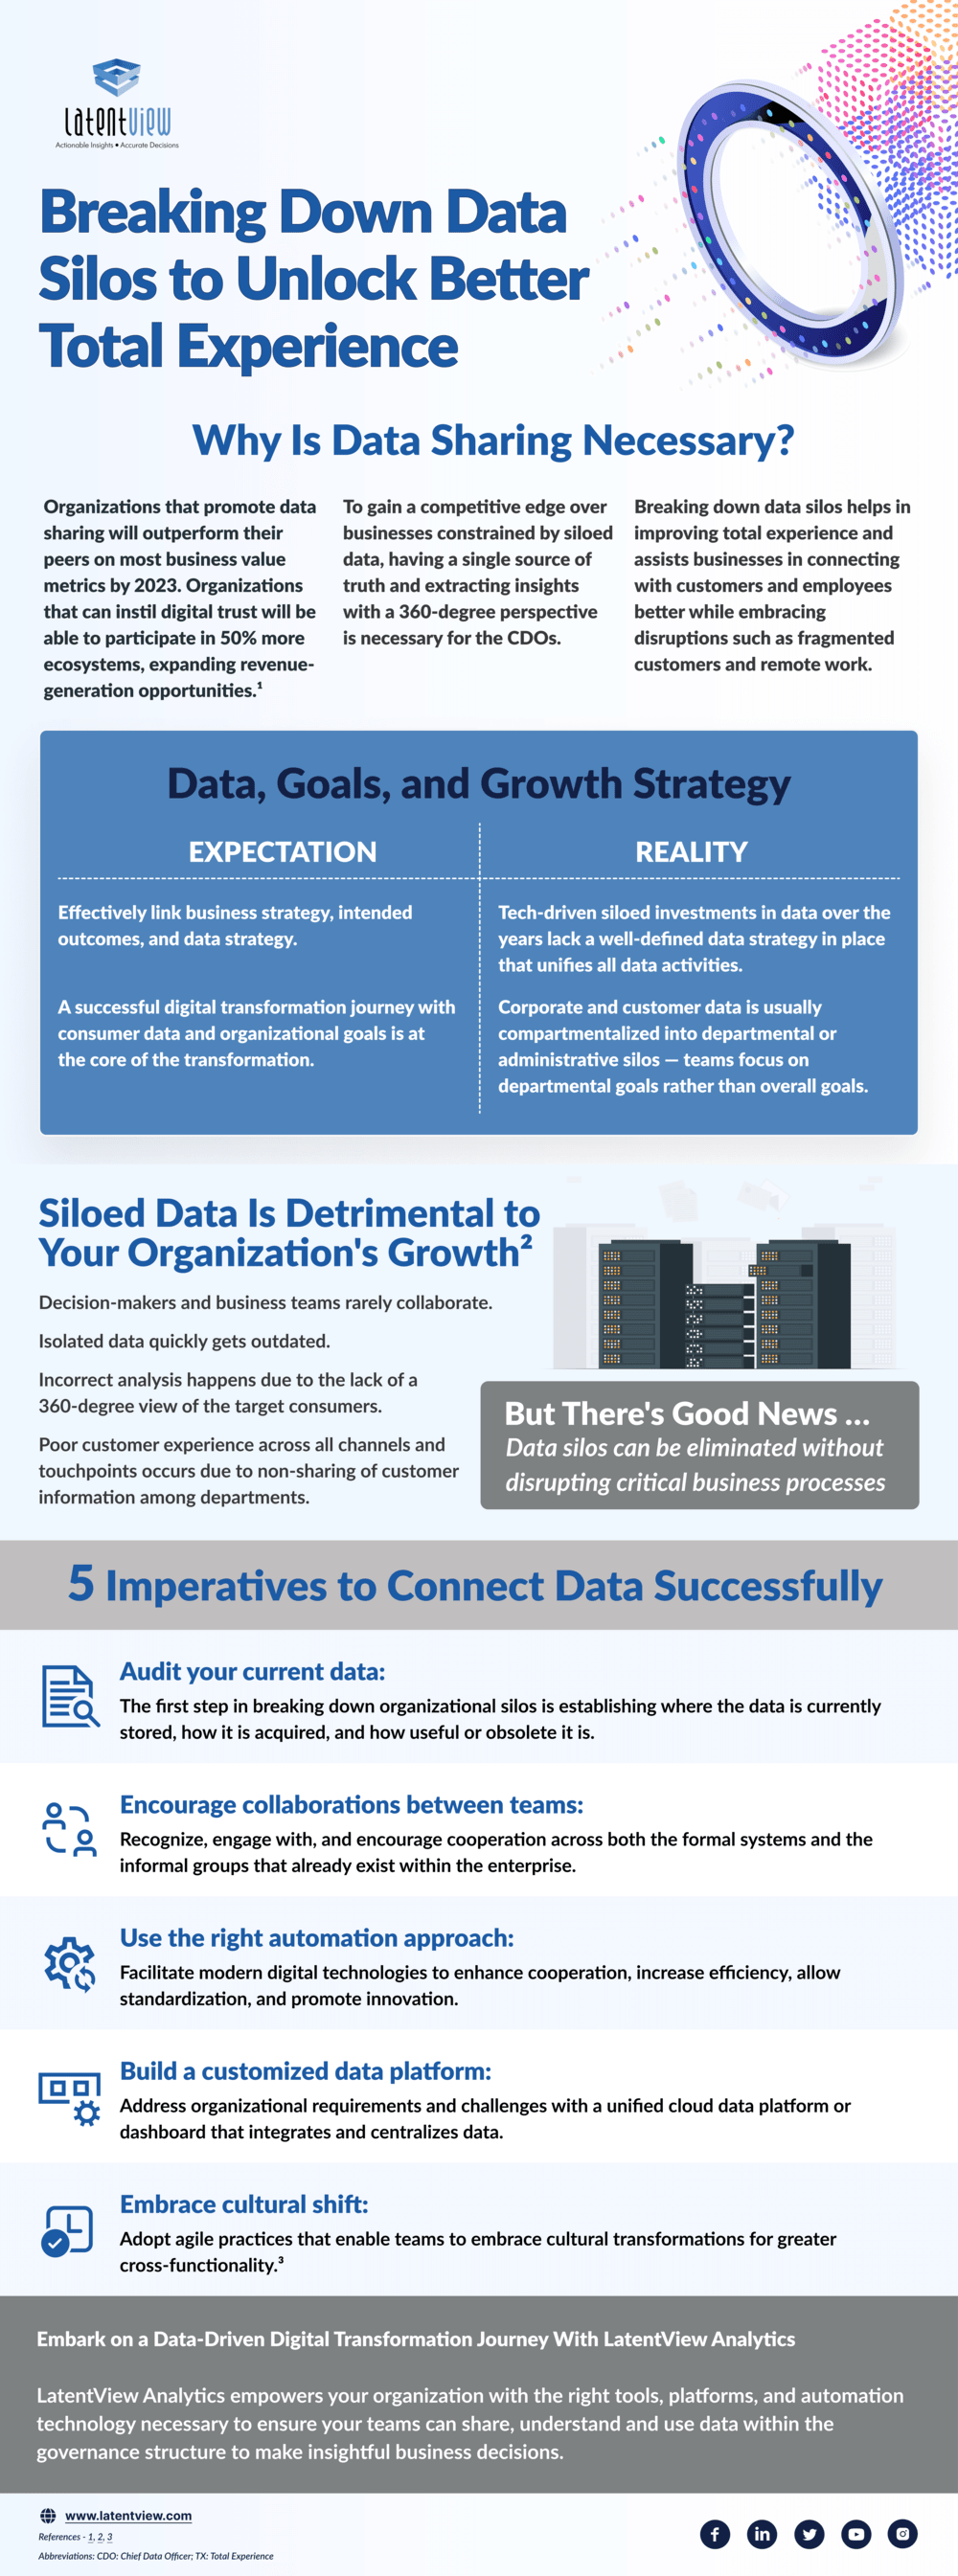 breaking down data silos to unlock better total experience thumb img